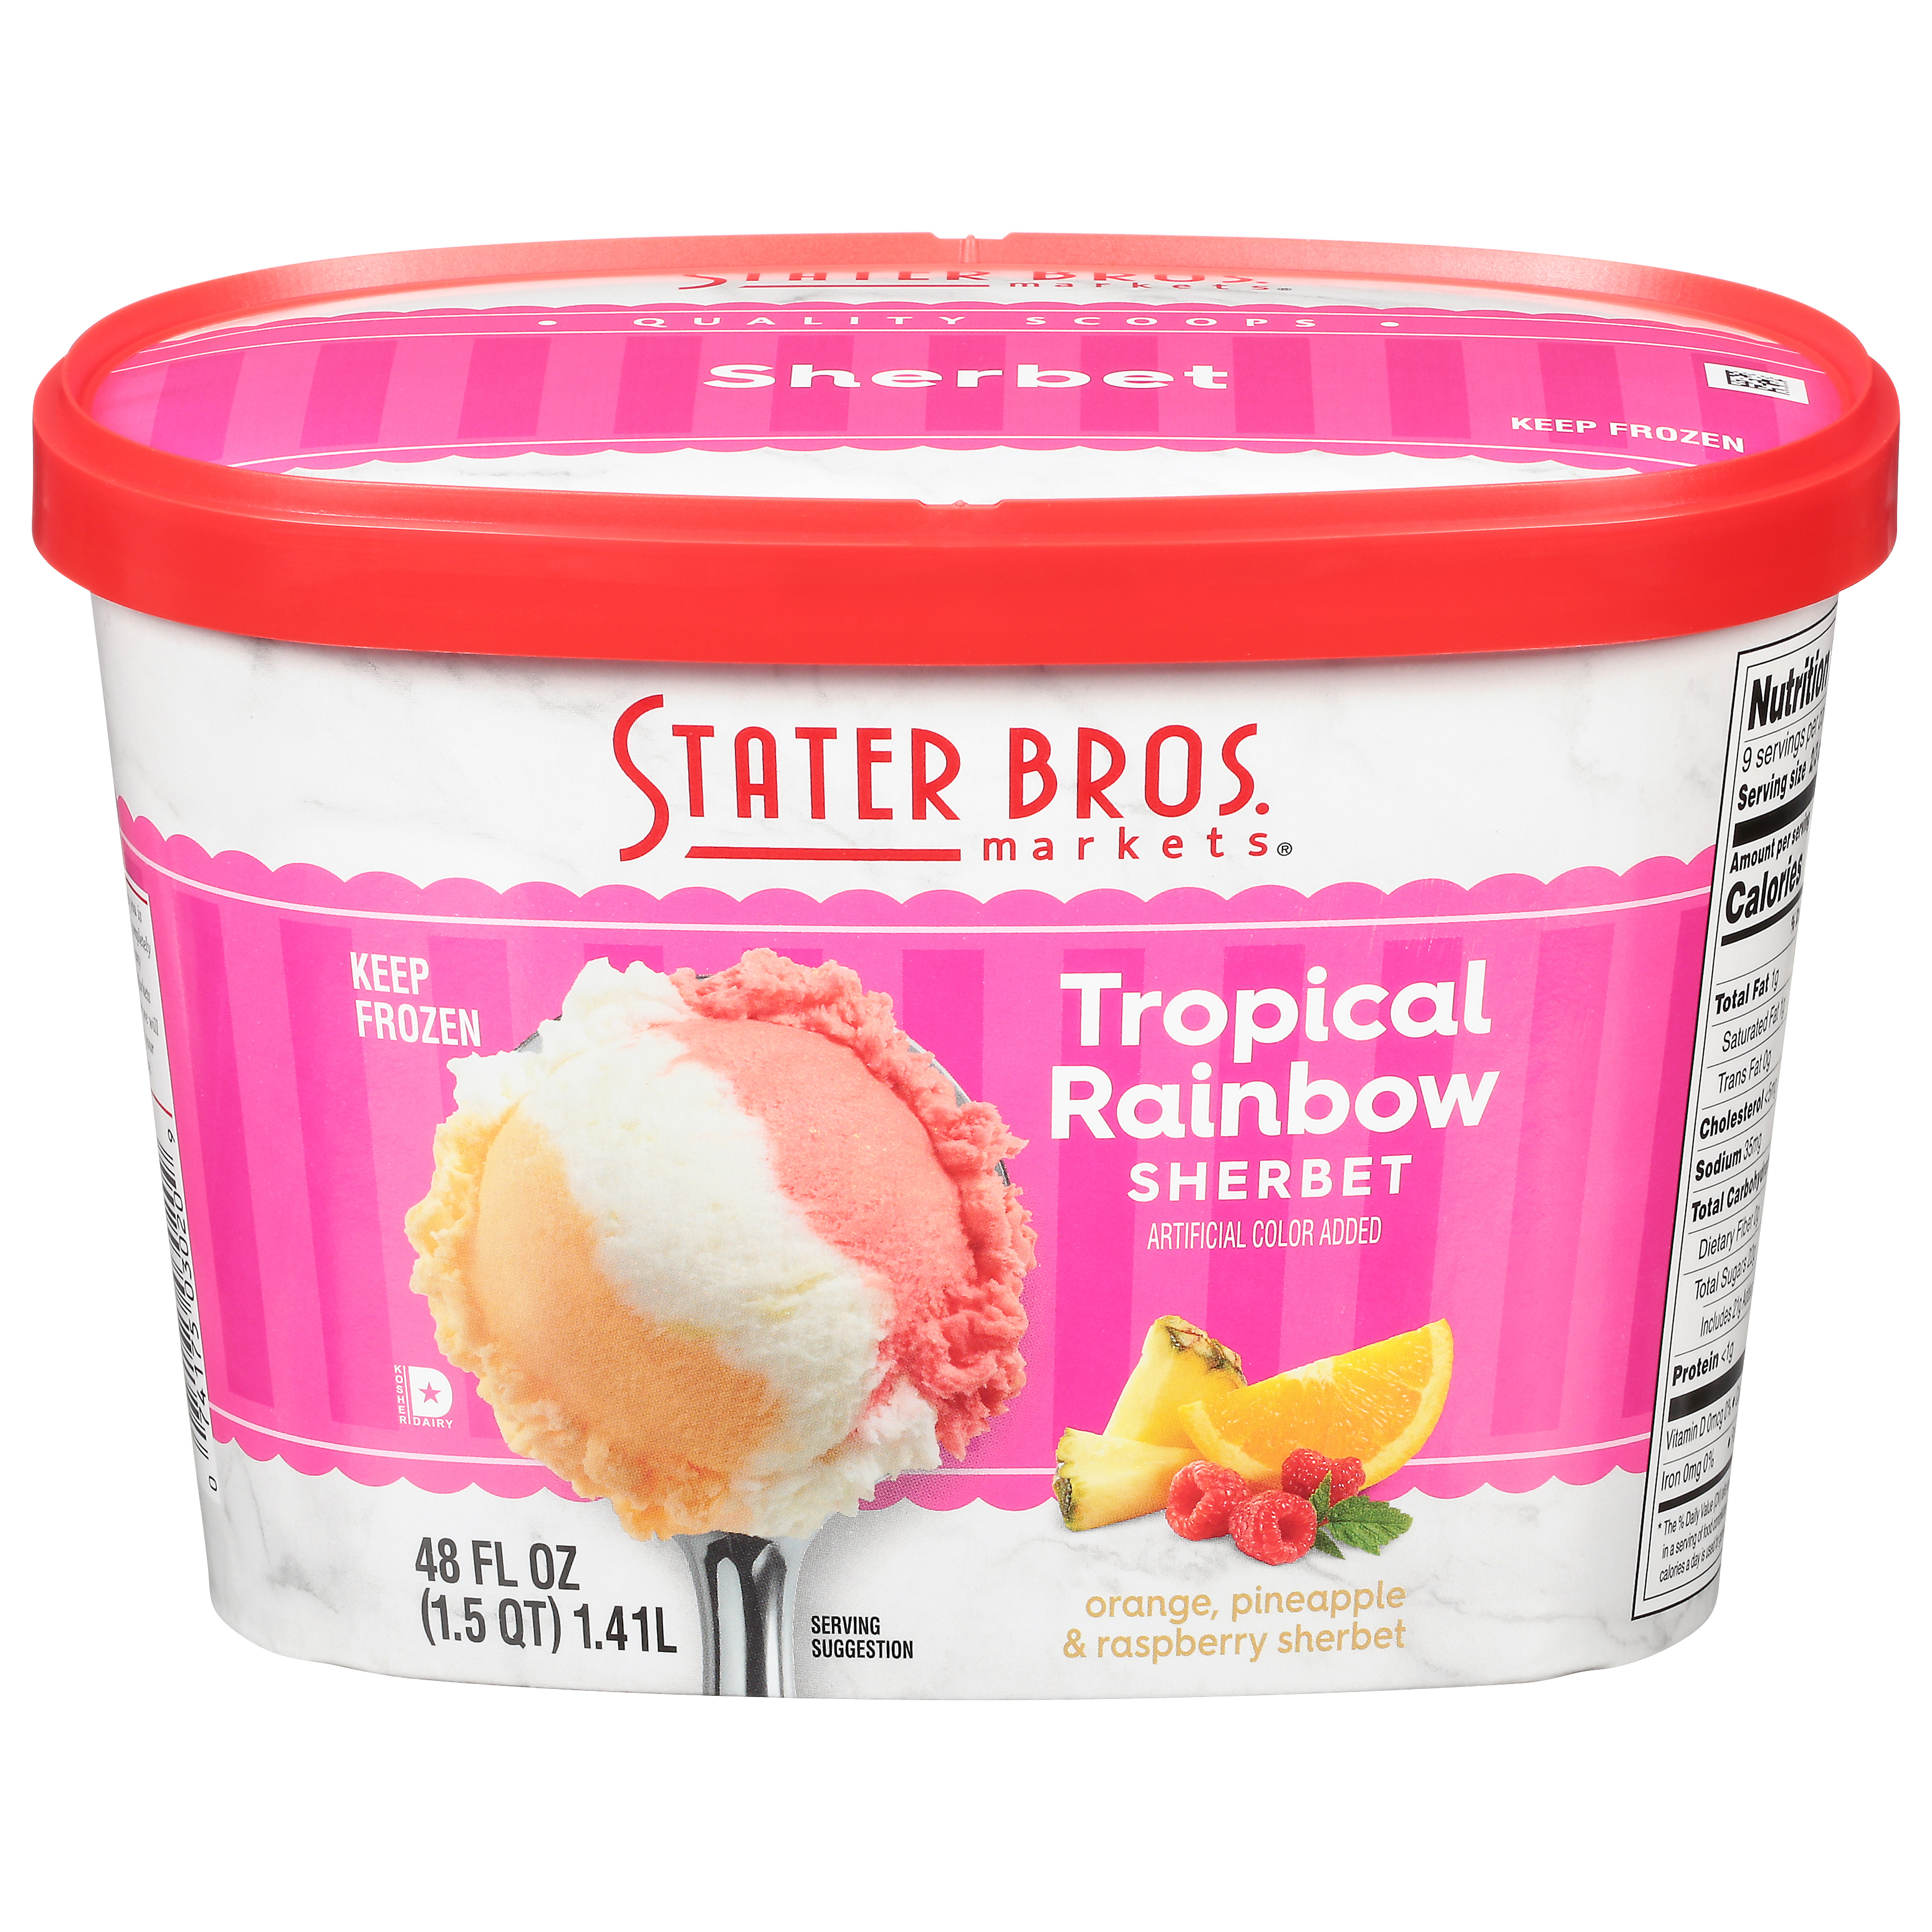 Stater Bros. Markets Tropical Rainbow Sherbet 48 oz Cup\tub